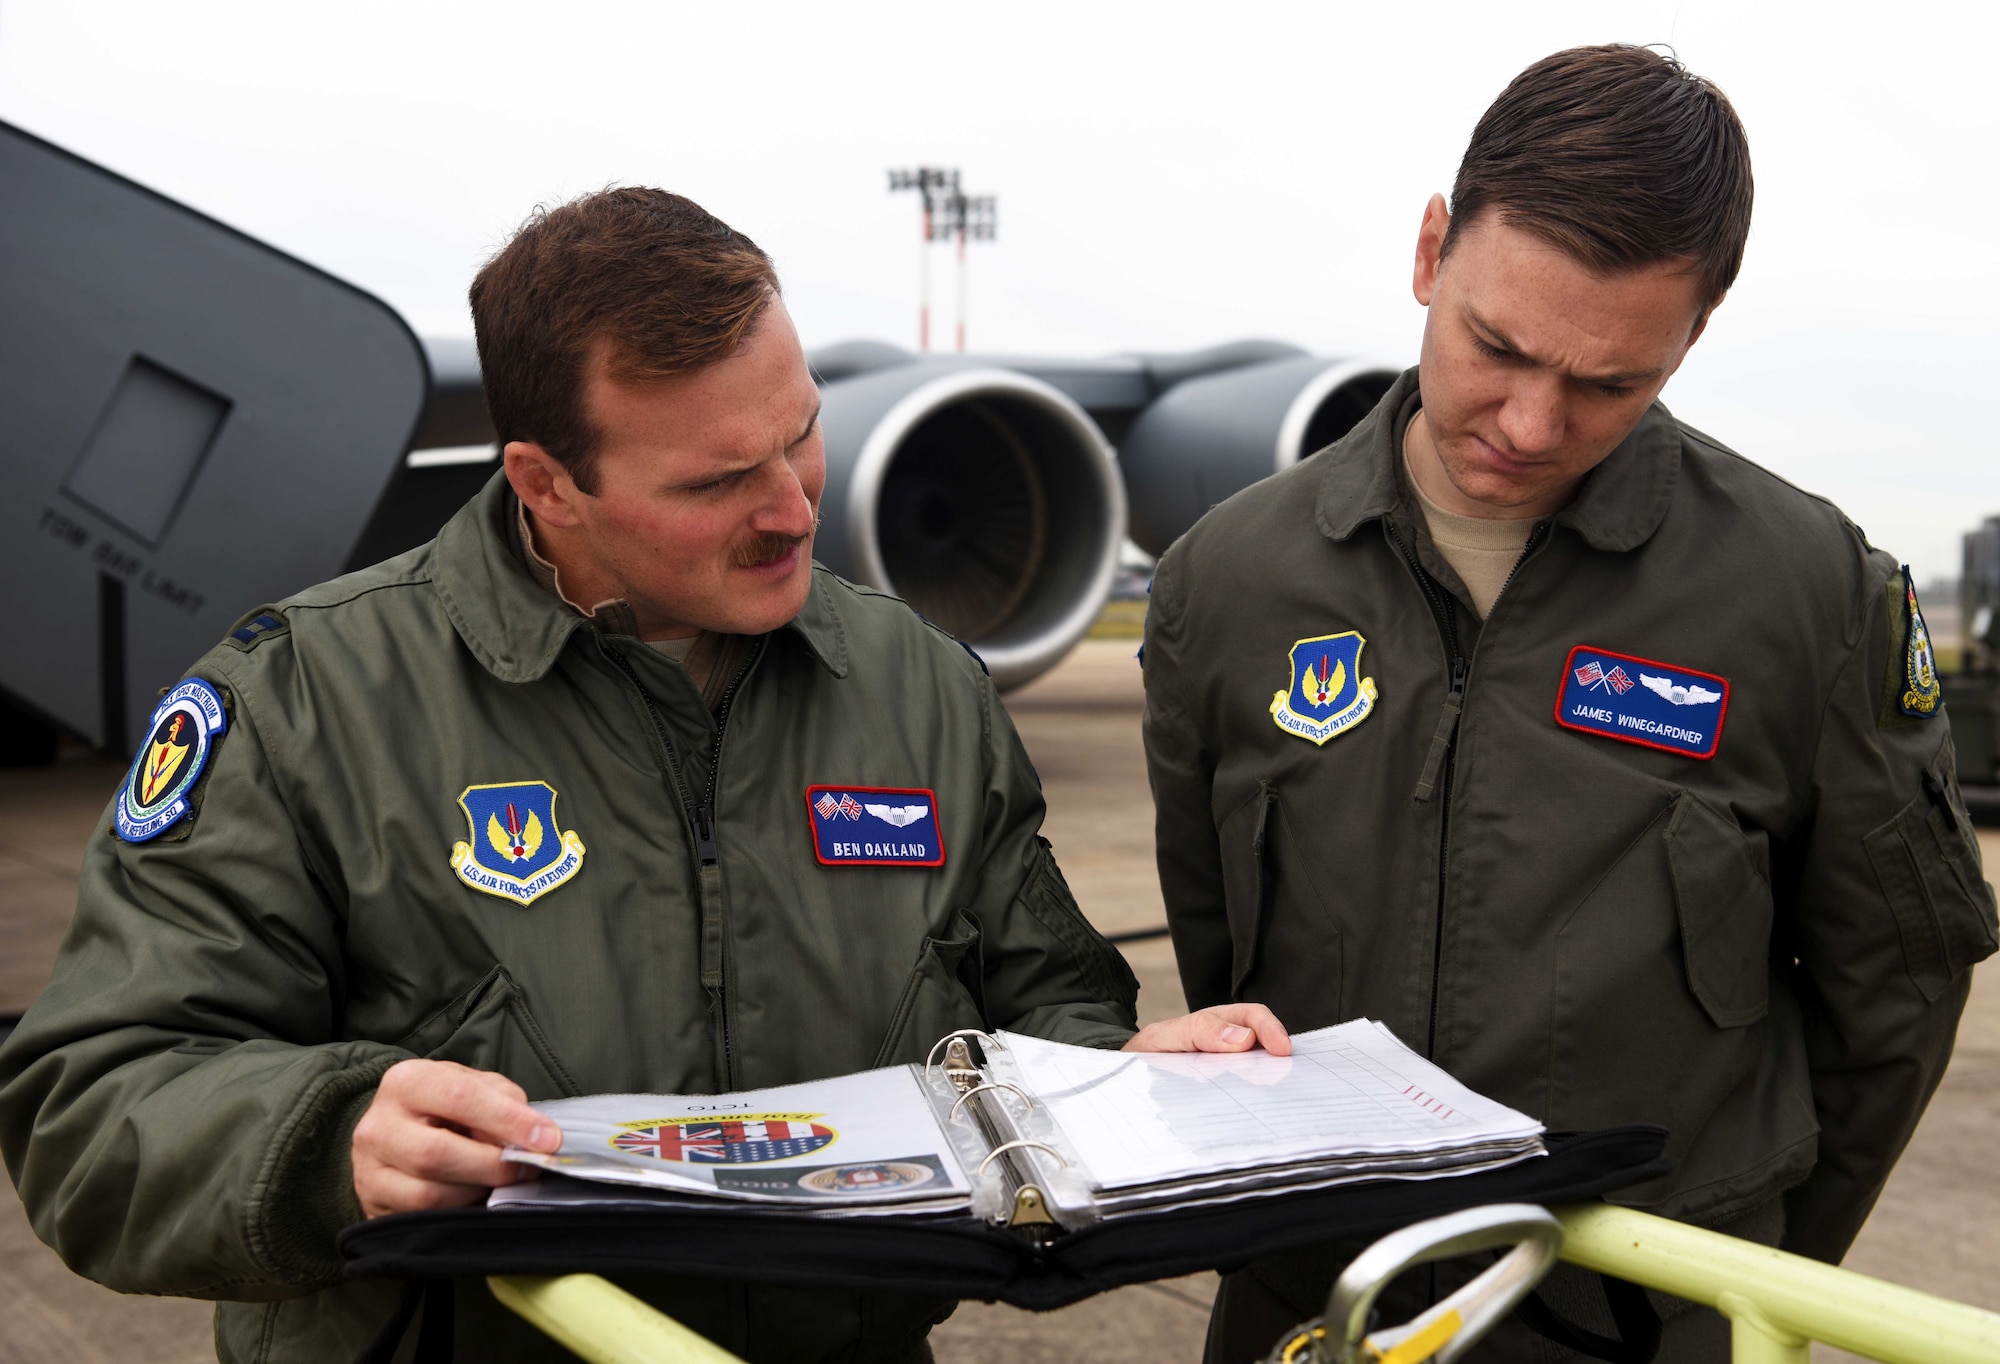 Capt. Ben Oakland, 351st Air Refueling Squadron aircraft commander, and 1st Lt. James Winegardner, 351st Air Refueling Squadron co-pilot, look over pre-flight checklists prior to takeoff during a readiness exercise at RAF Mildenhall, England, Oct. 3, 2019. Exercise scenarios were designed to ensure 100th ARW Airmen were fully prepared for potential contingencies in the wing’s area of responsibility. (U.S. Air Force photo by Airman 1st Class Brandon Esau)